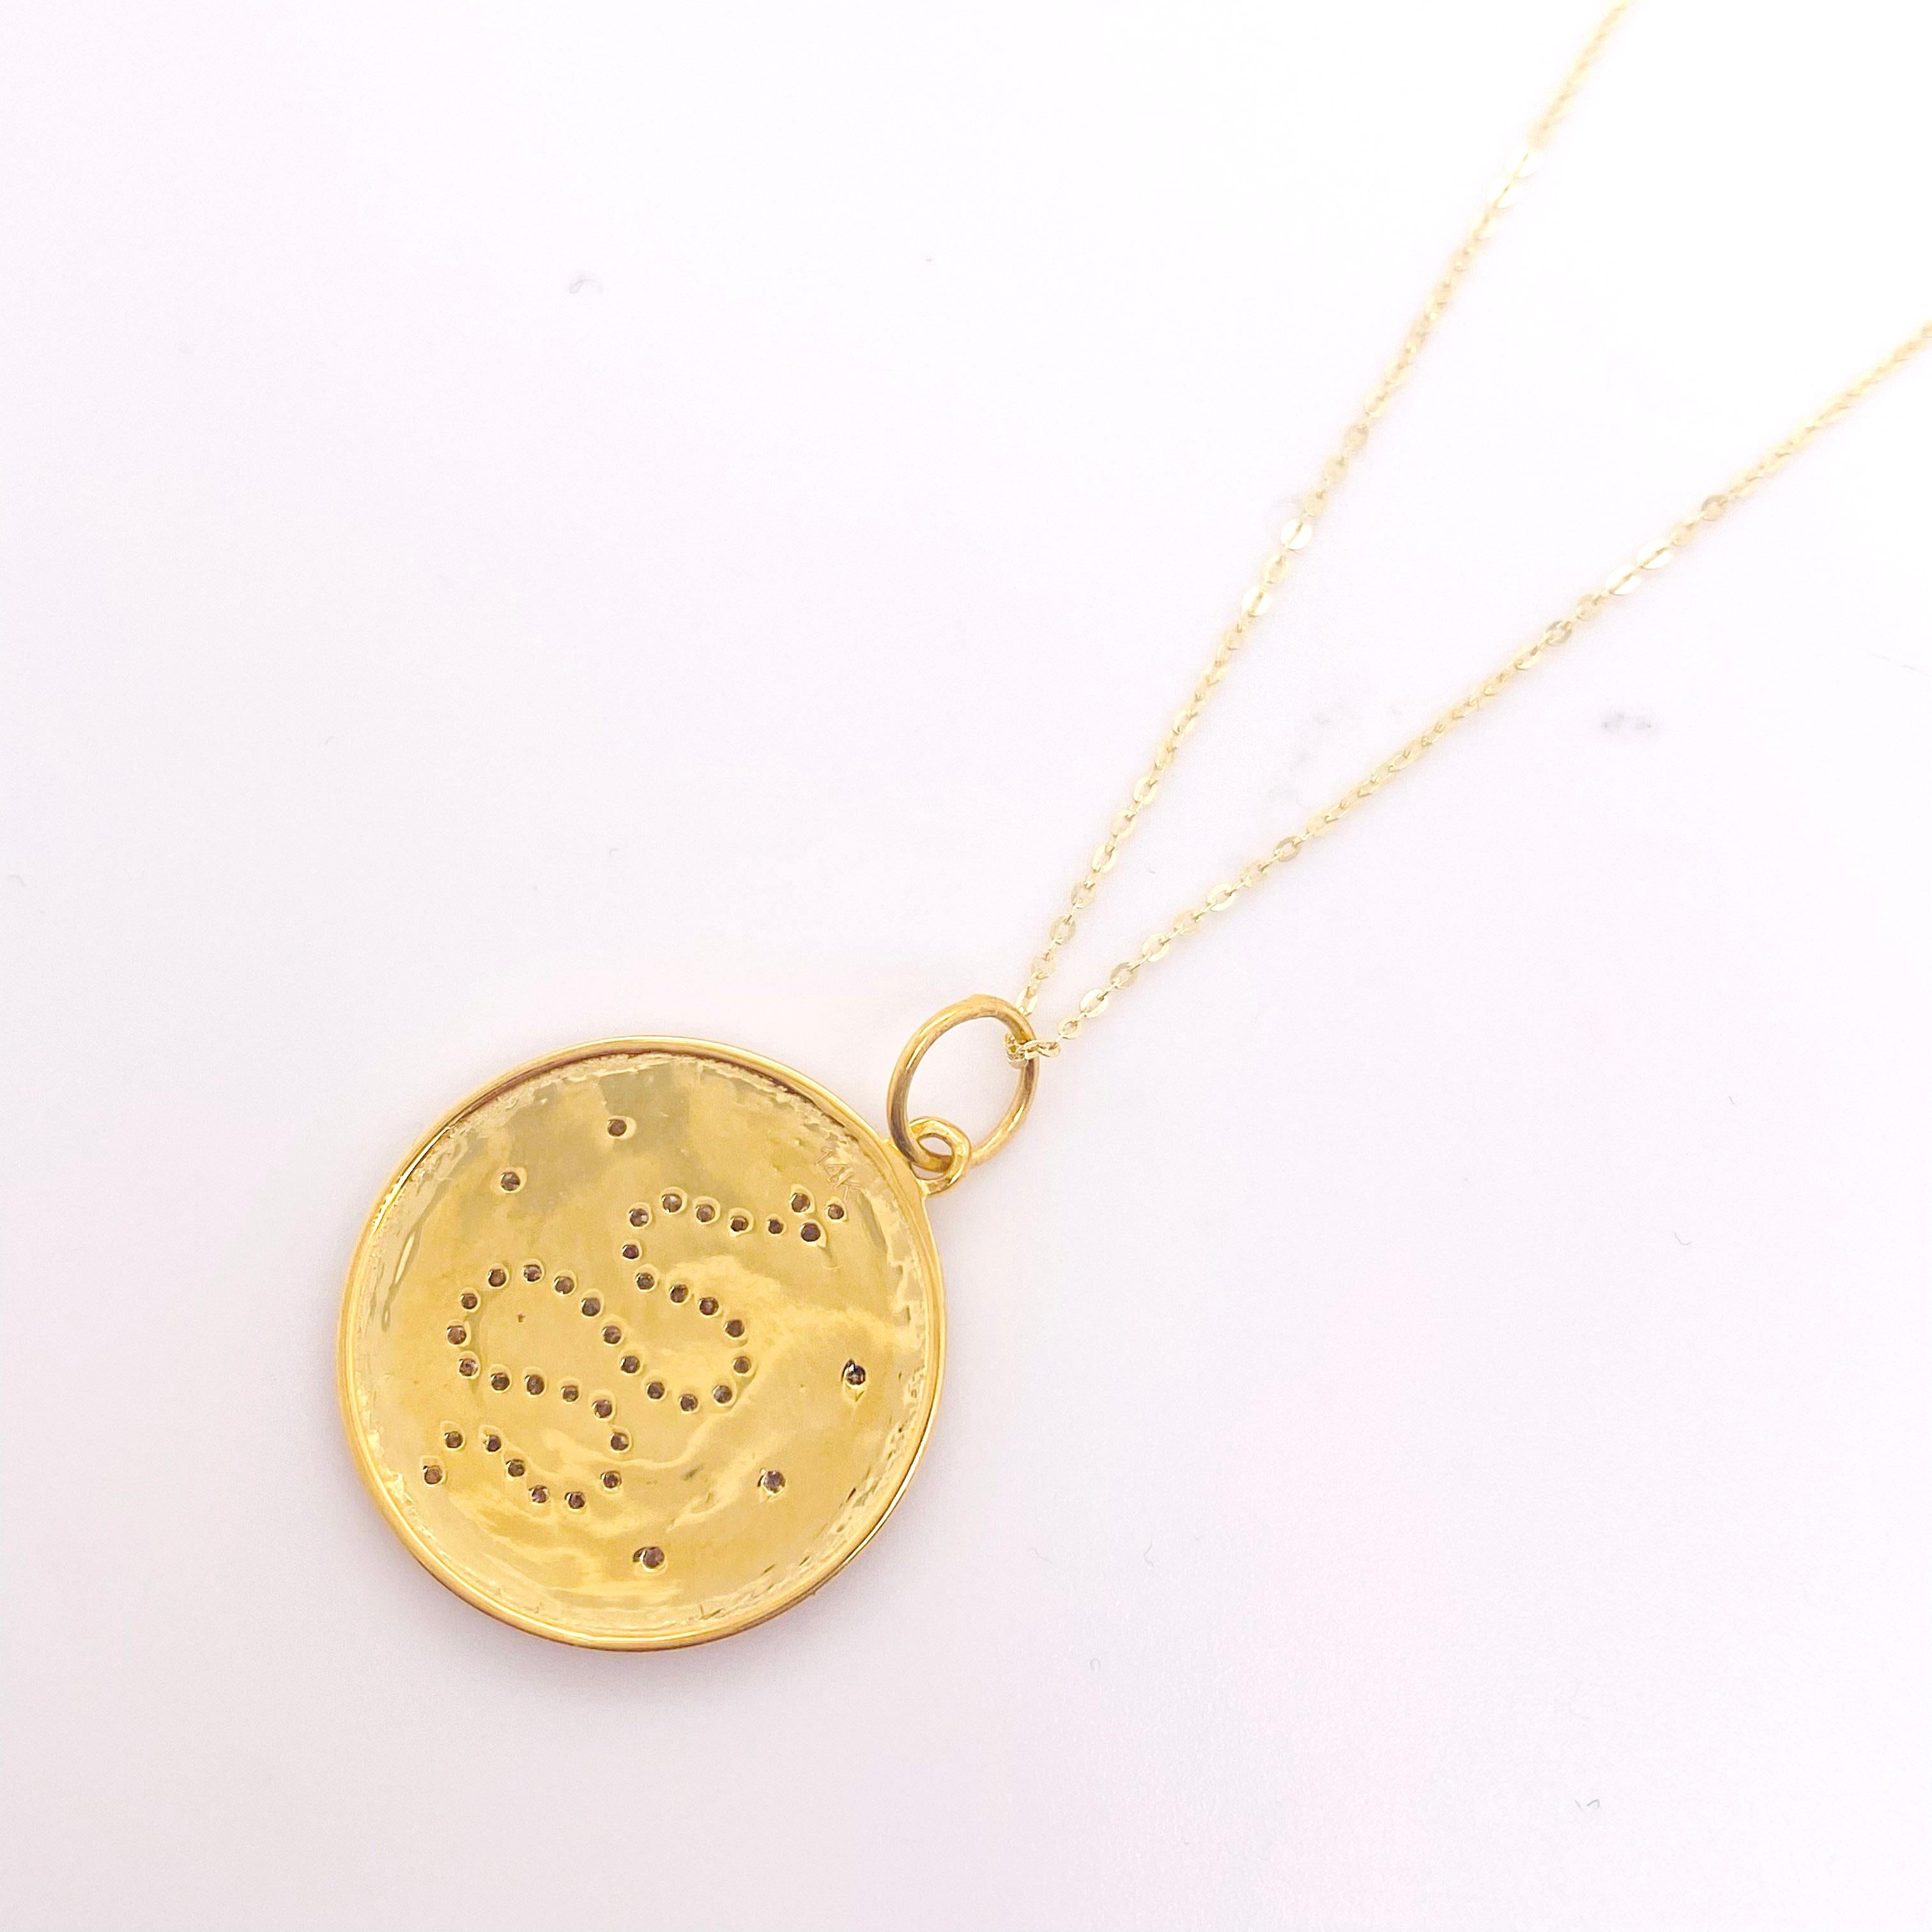 Contemporary Serpent Snake Necklace, Diamonds in Yellow Gold, Snake Disk Pendant Necklace For Sale